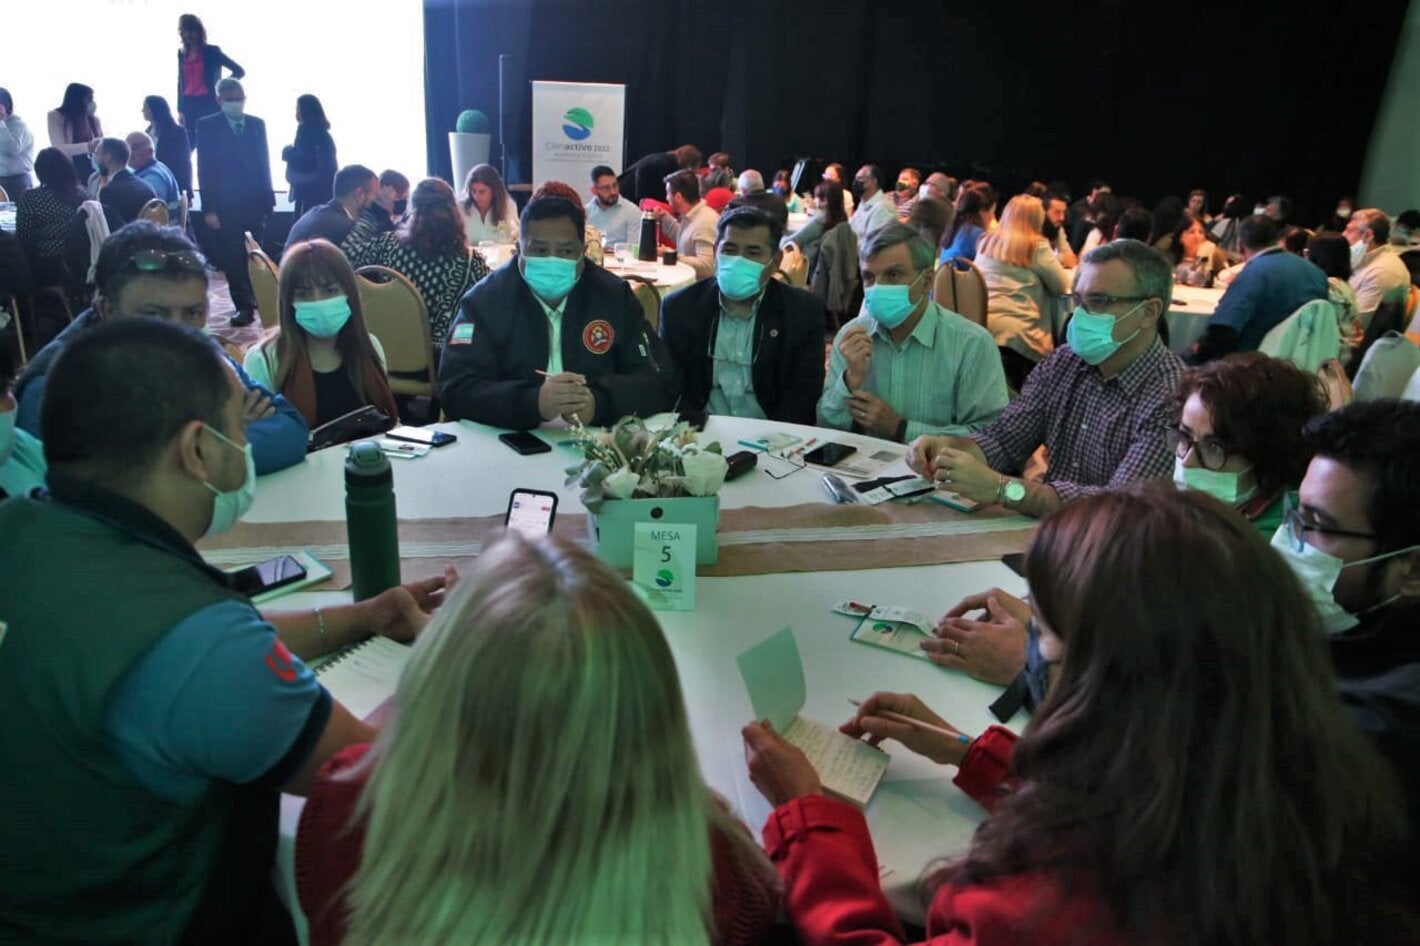 Forum participants at one of the tables.  Photo: Press courtesy of the Ministry of Public Health of Tucumán.